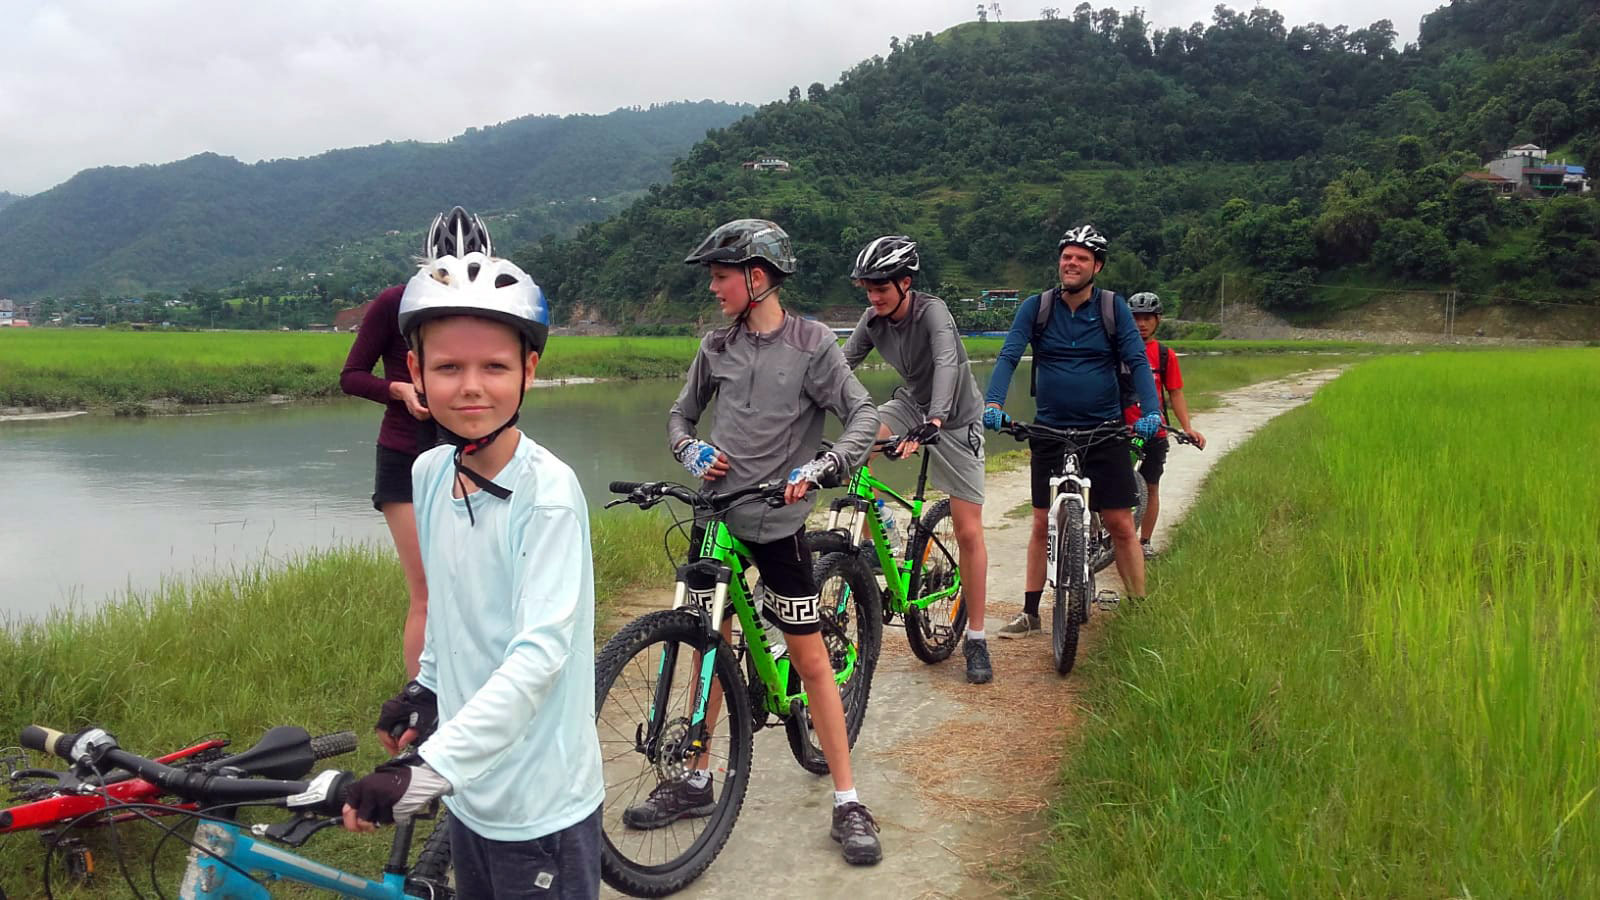 A group of family members are mountain biking along the Harpan River in Pame vilage, Pokhara.